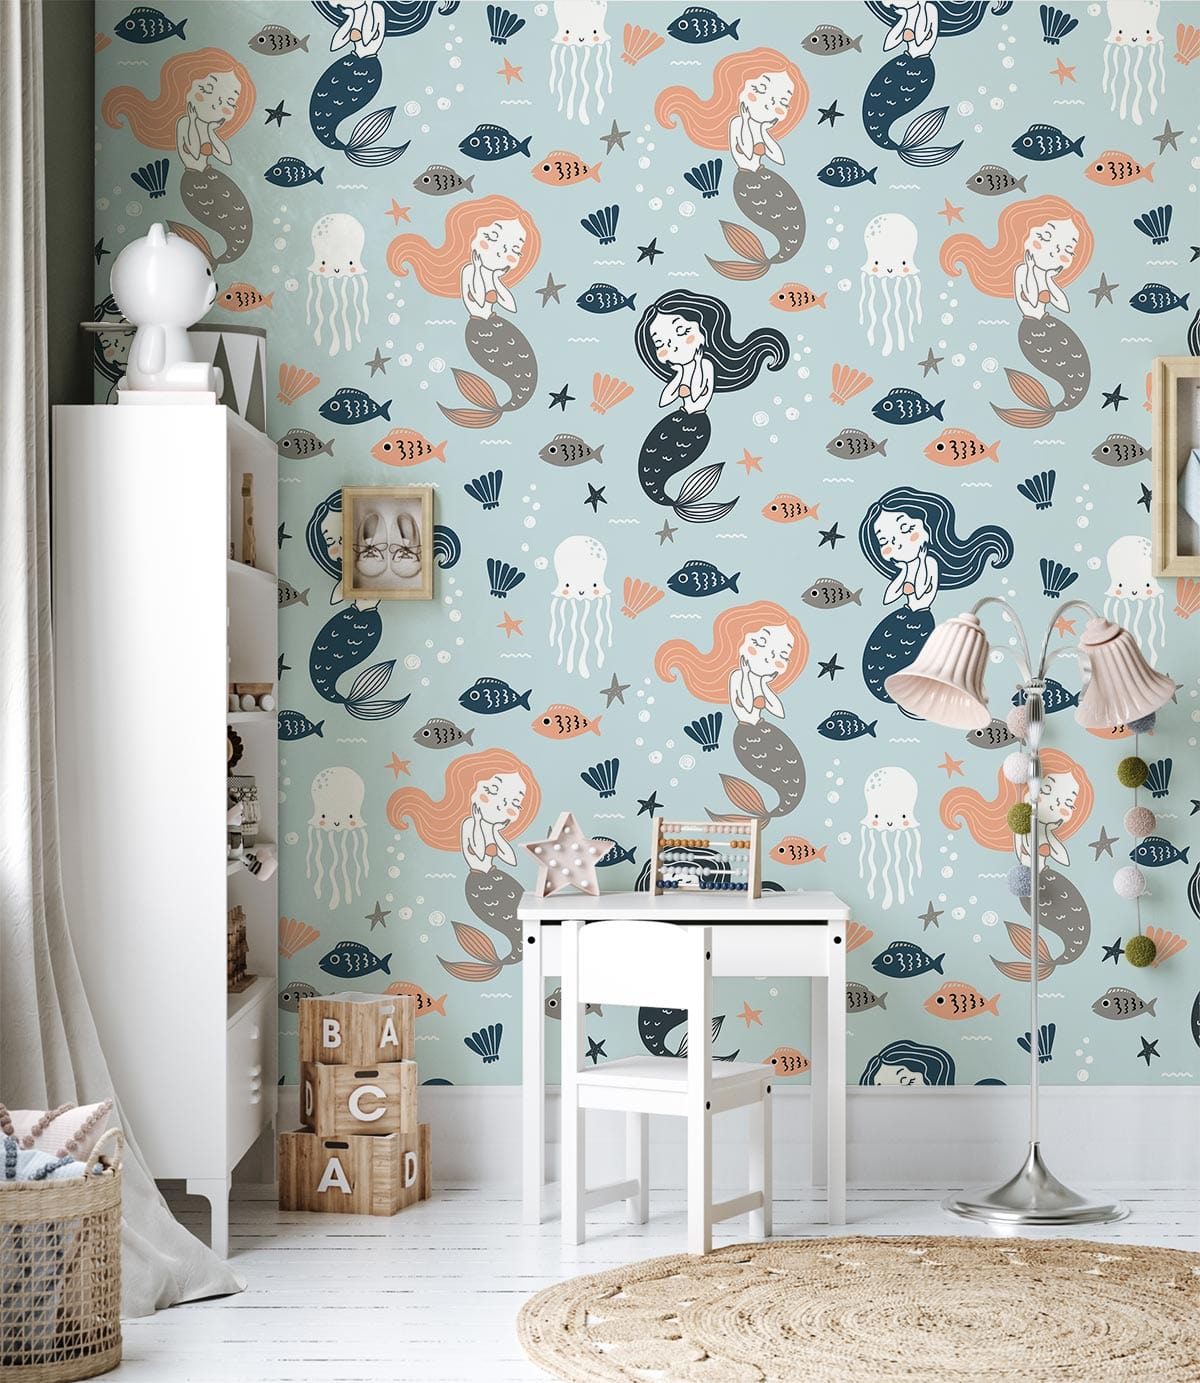 Sleeping Mermaids and Fishes Animal Wallpaper Home Interior Decor